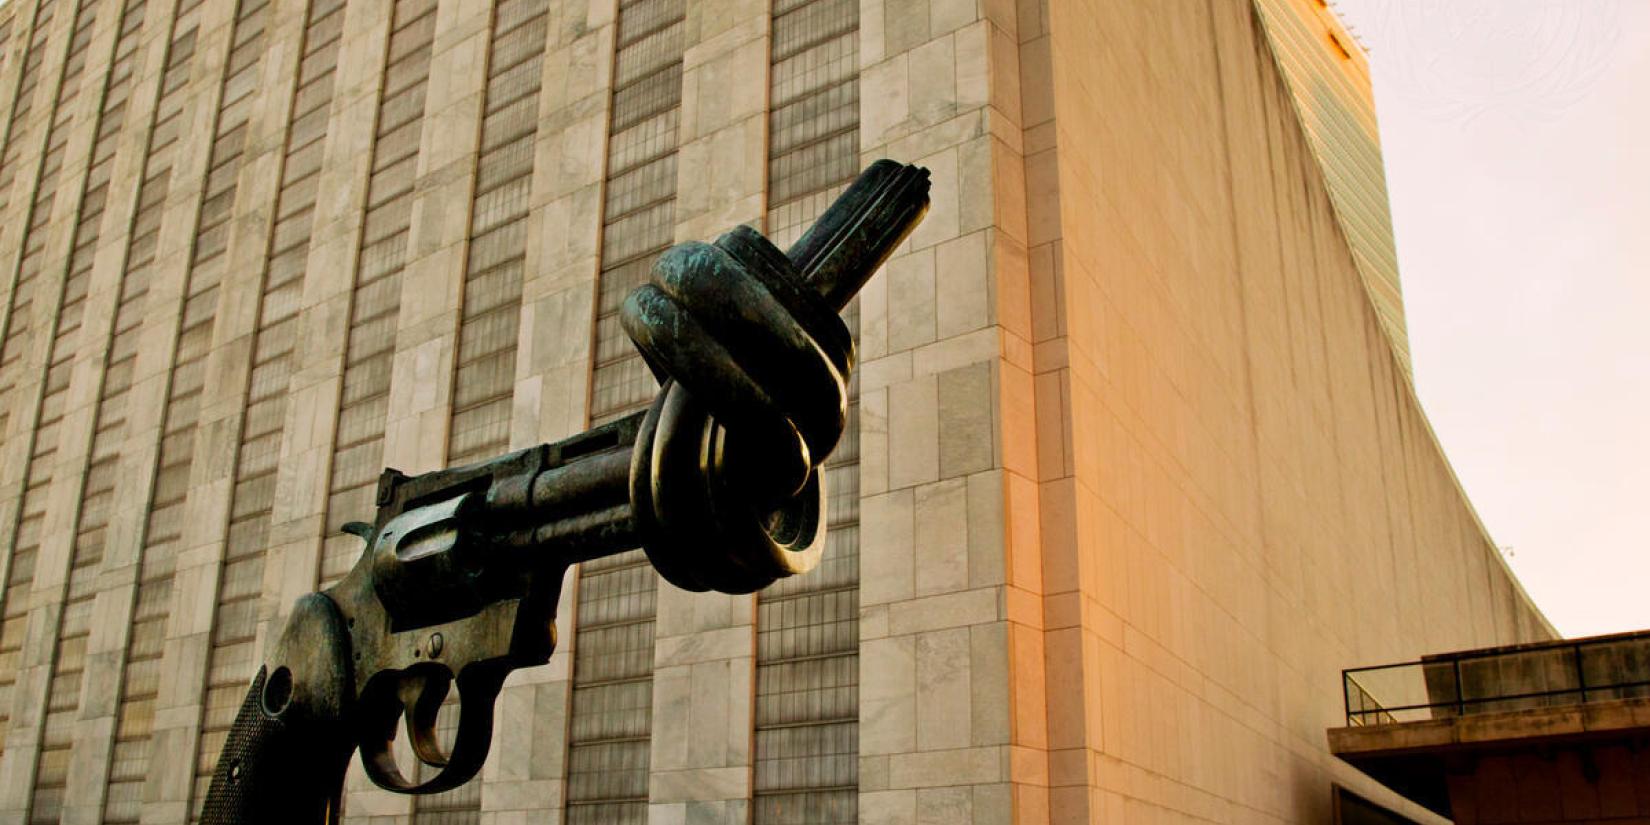 The UN Security Council considered the African Union's "Silencing the Guns" initiative, which aims to end war and conflicts on the African continent.